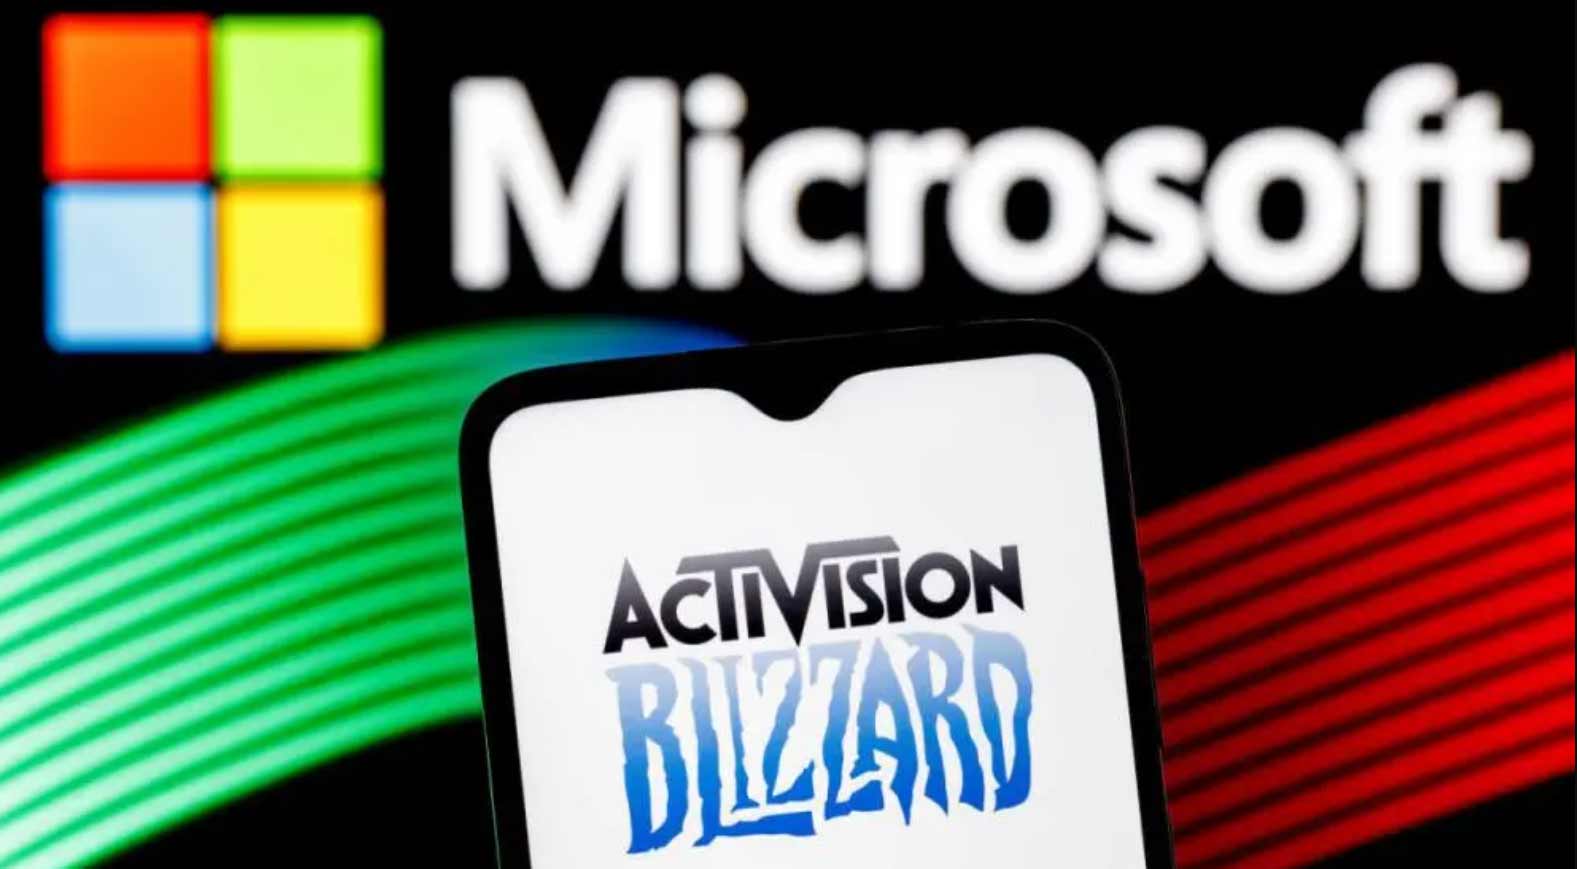 Microsoft to Lay Off 1,900 Activision Blizzard, Xbox Staff